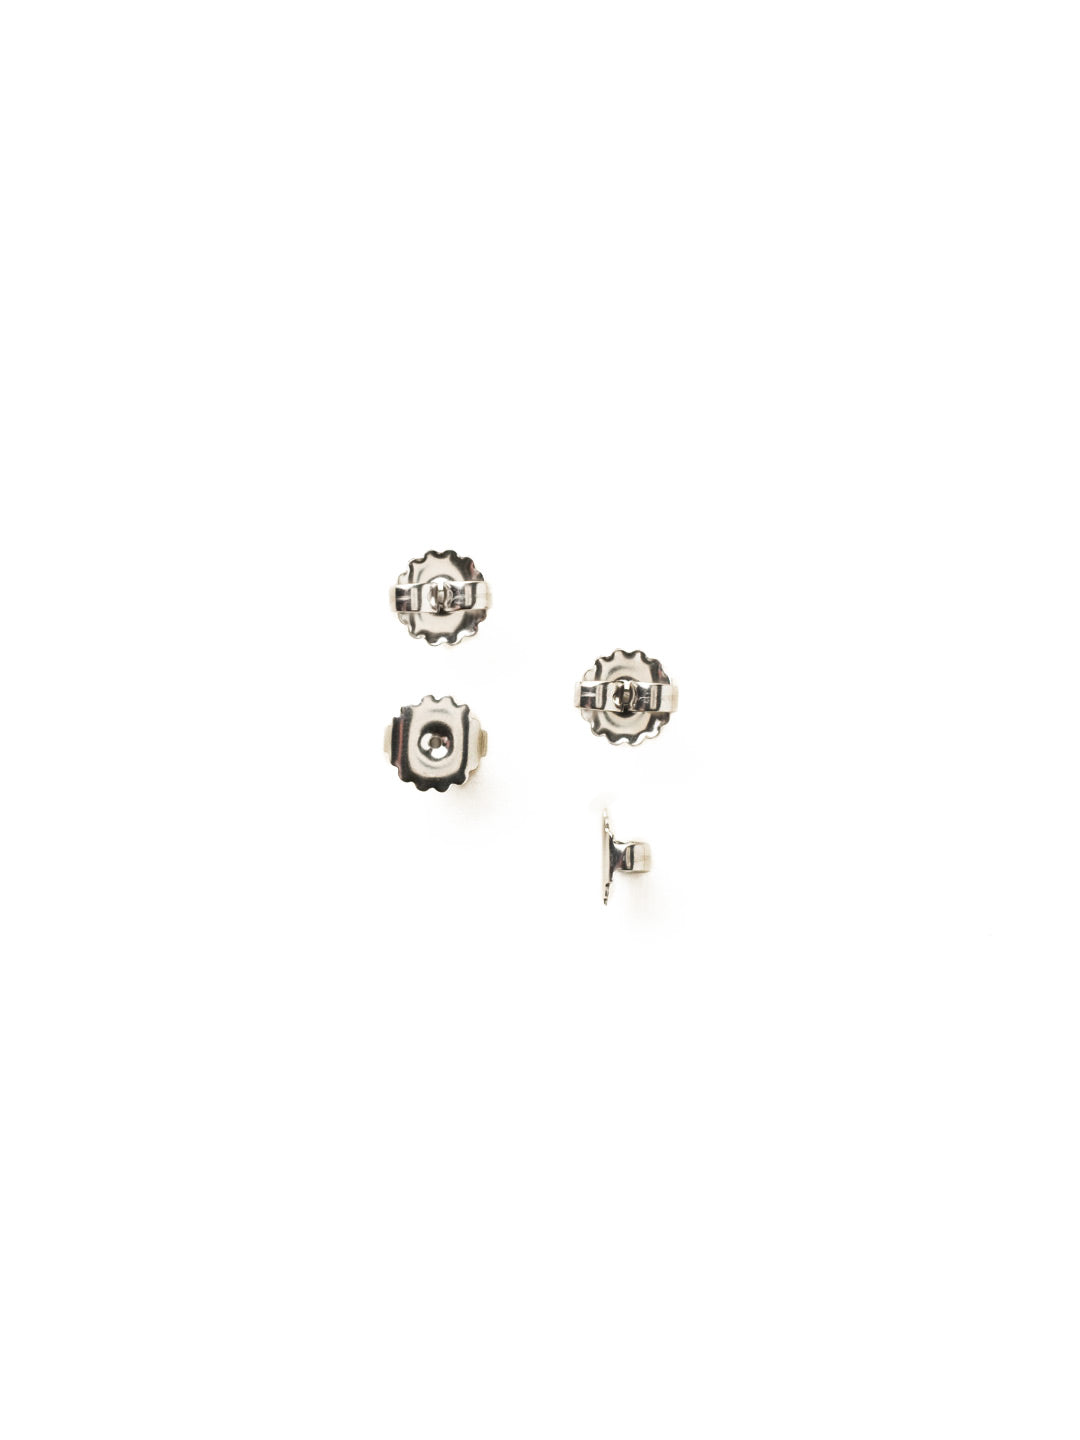 Monster Earring Backs (4 Pack) - MBLG1AS - This 4 pack of over-sized earring backs give you the comfort and stability to wear our earrings all day long!Antique Silver-tone finish